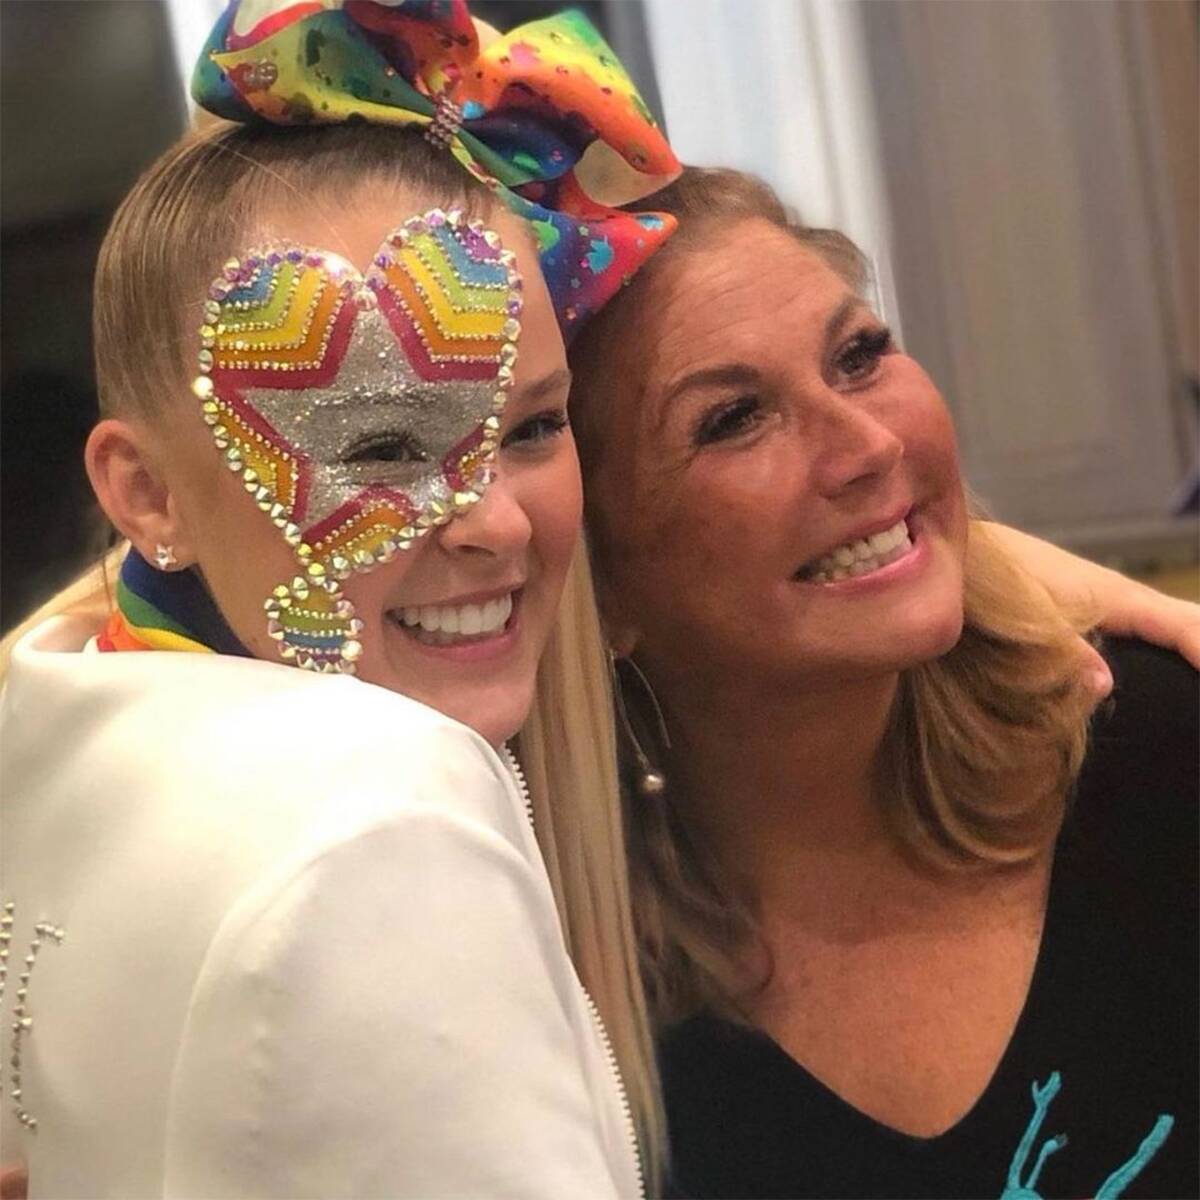 JoJo Siwa Gets Support From Abby Lee Miller After Coming Out as Member of the LGBTQ+ Community